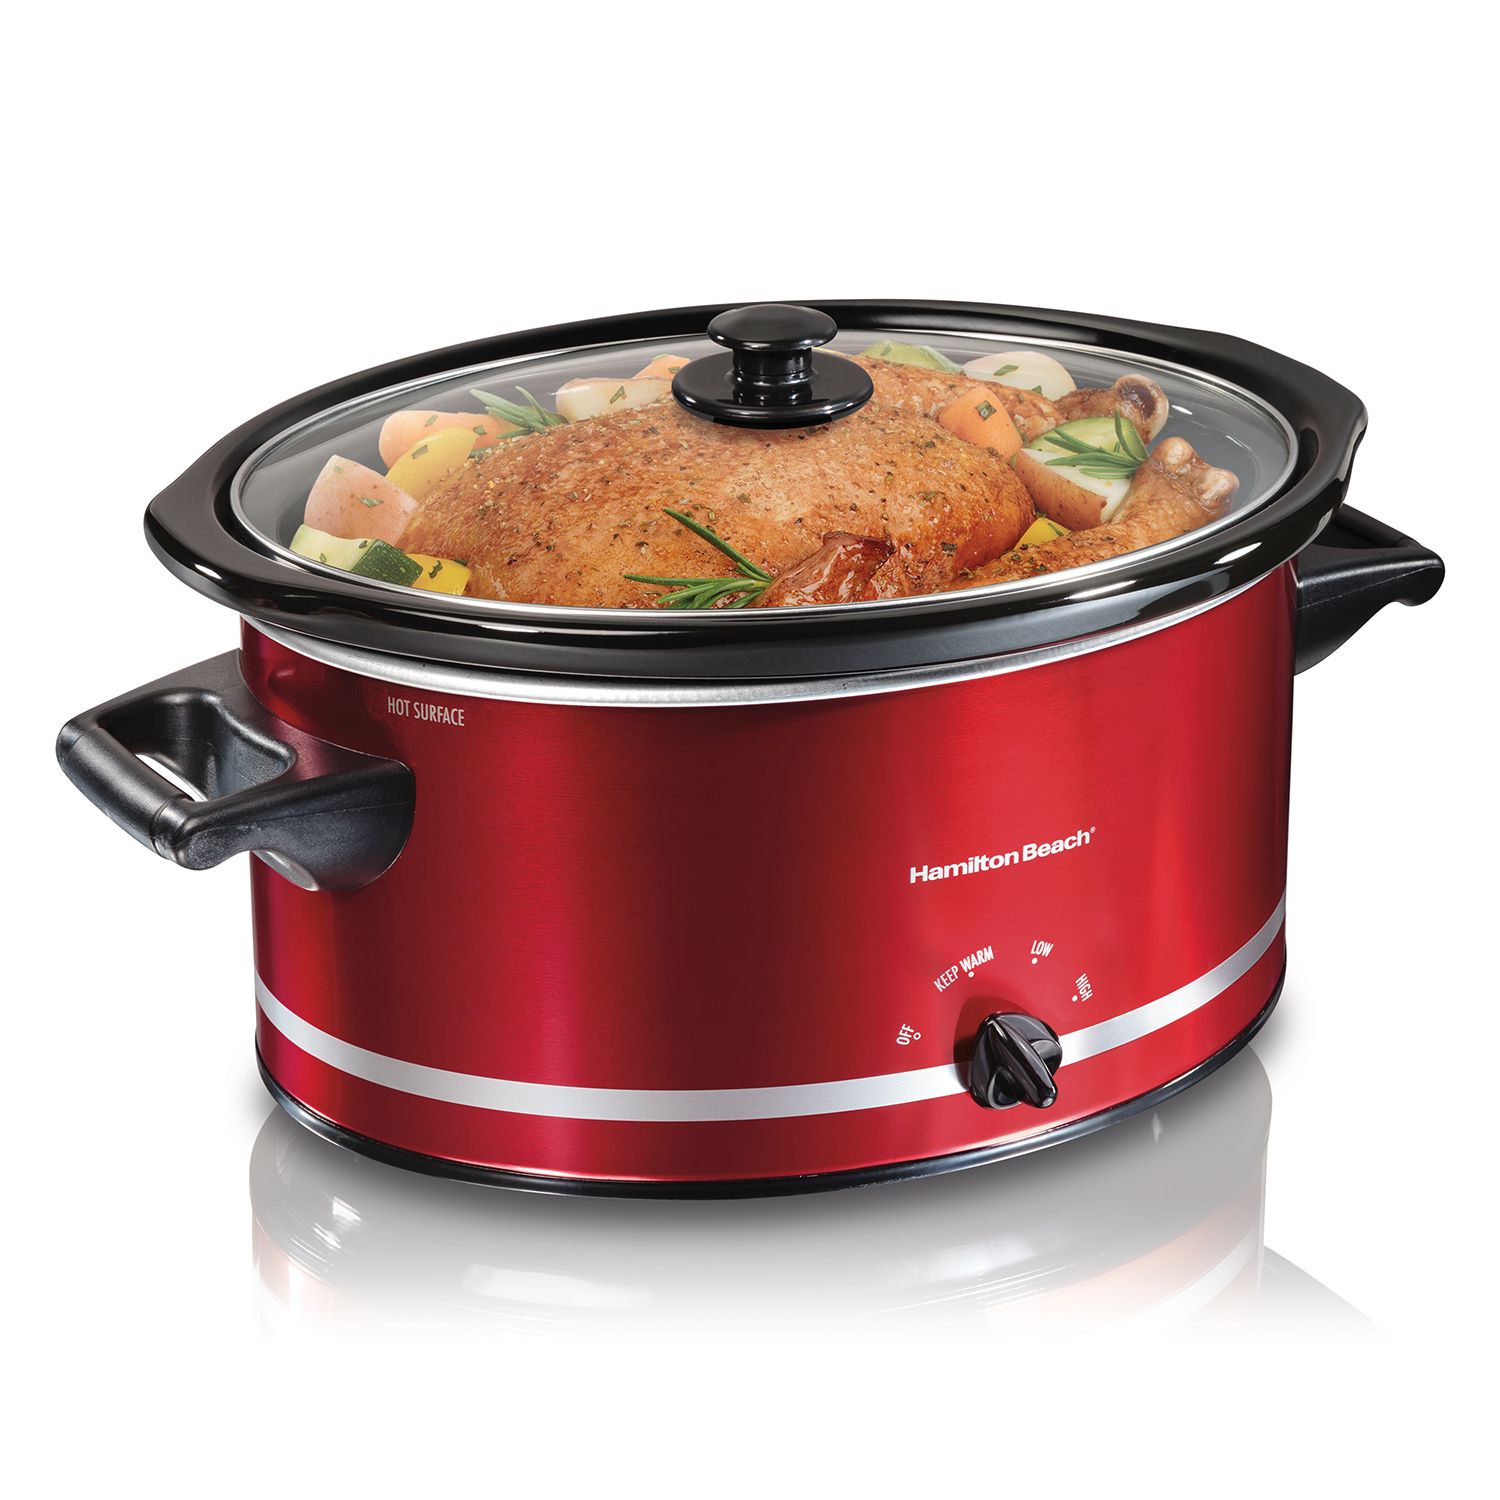 Crock-Pot Programmable 6-Quart Countdown Oval Slow Cooker with Dipper, Red